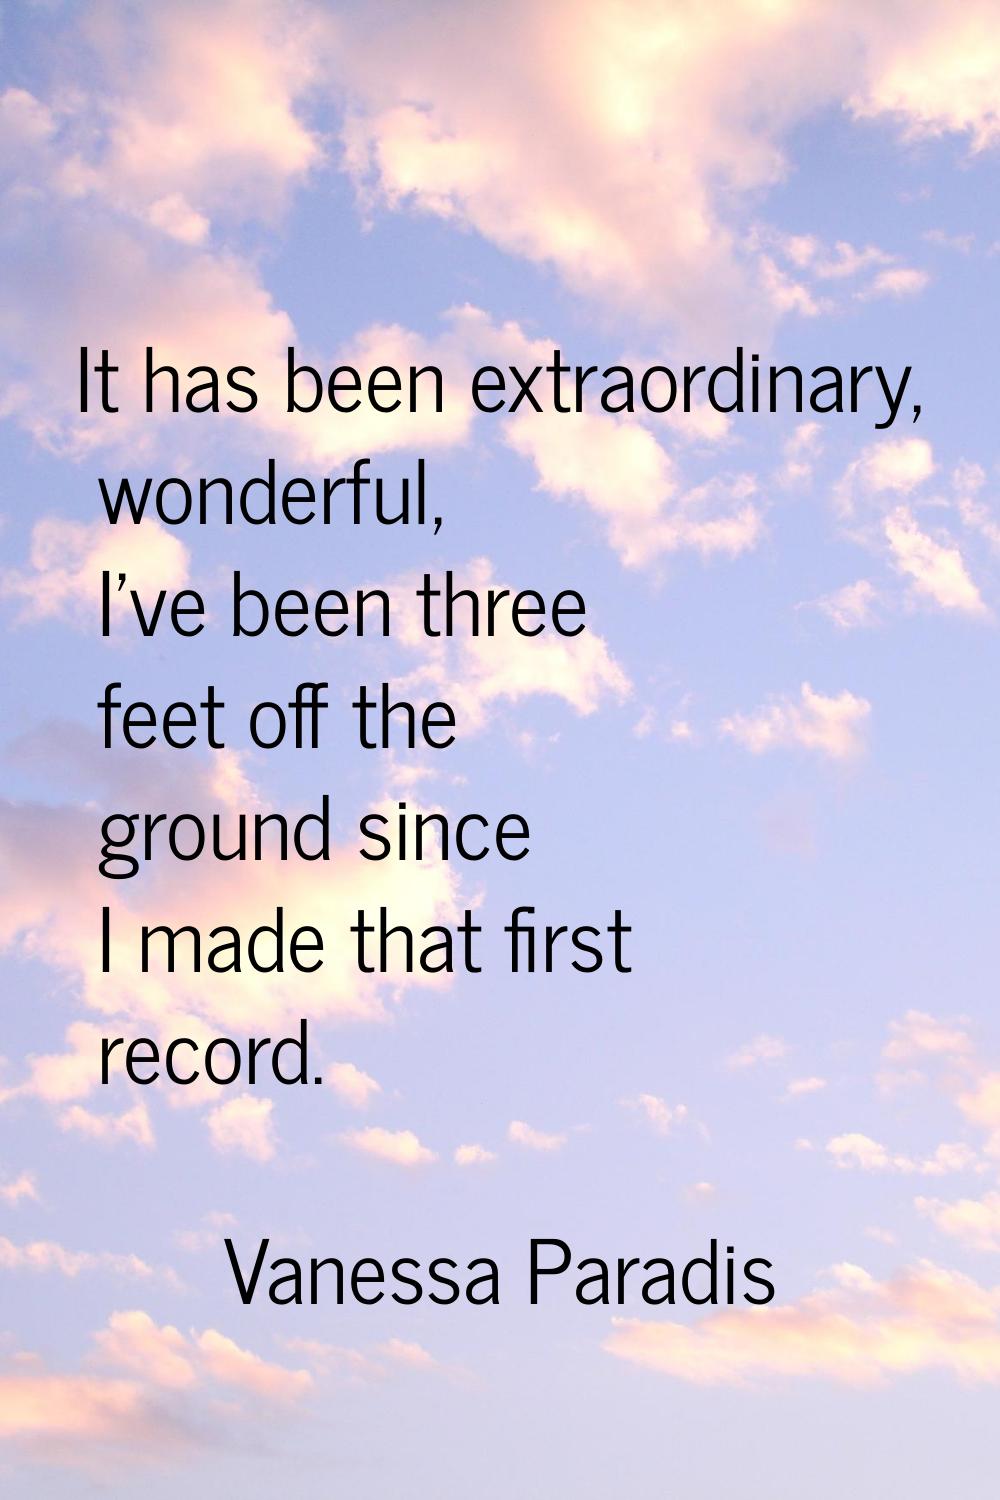 It has been extraordinary, wonderful, I've been three feet off the ground since I made that first r